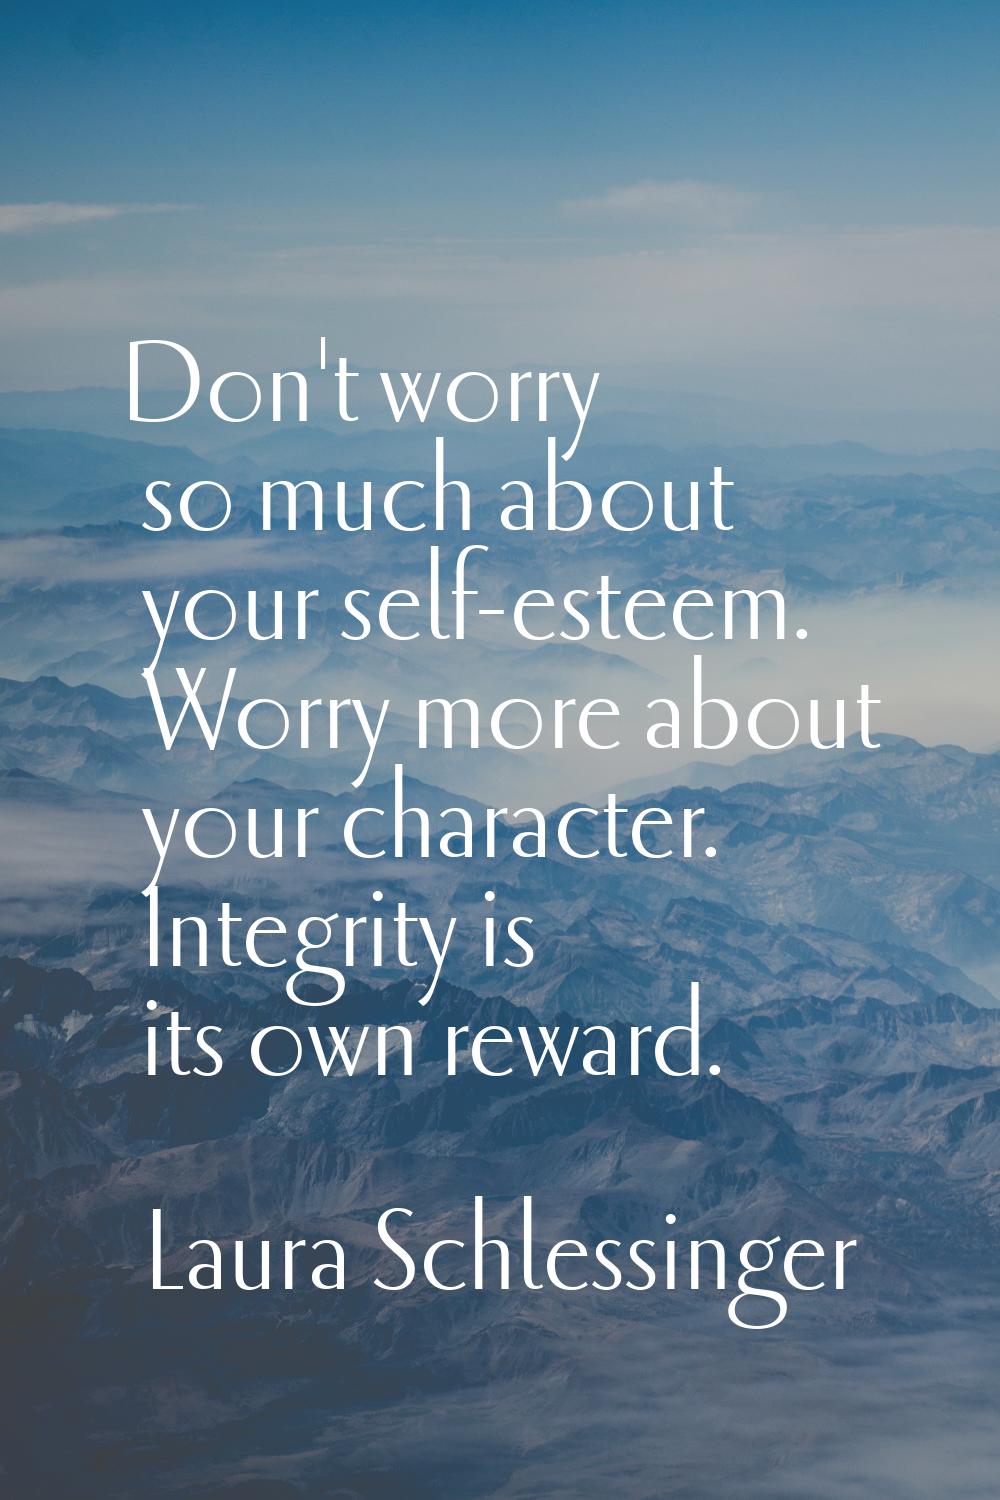 Don't worry so much about your self-esteem. Worry more about your character. Integrity is its own r